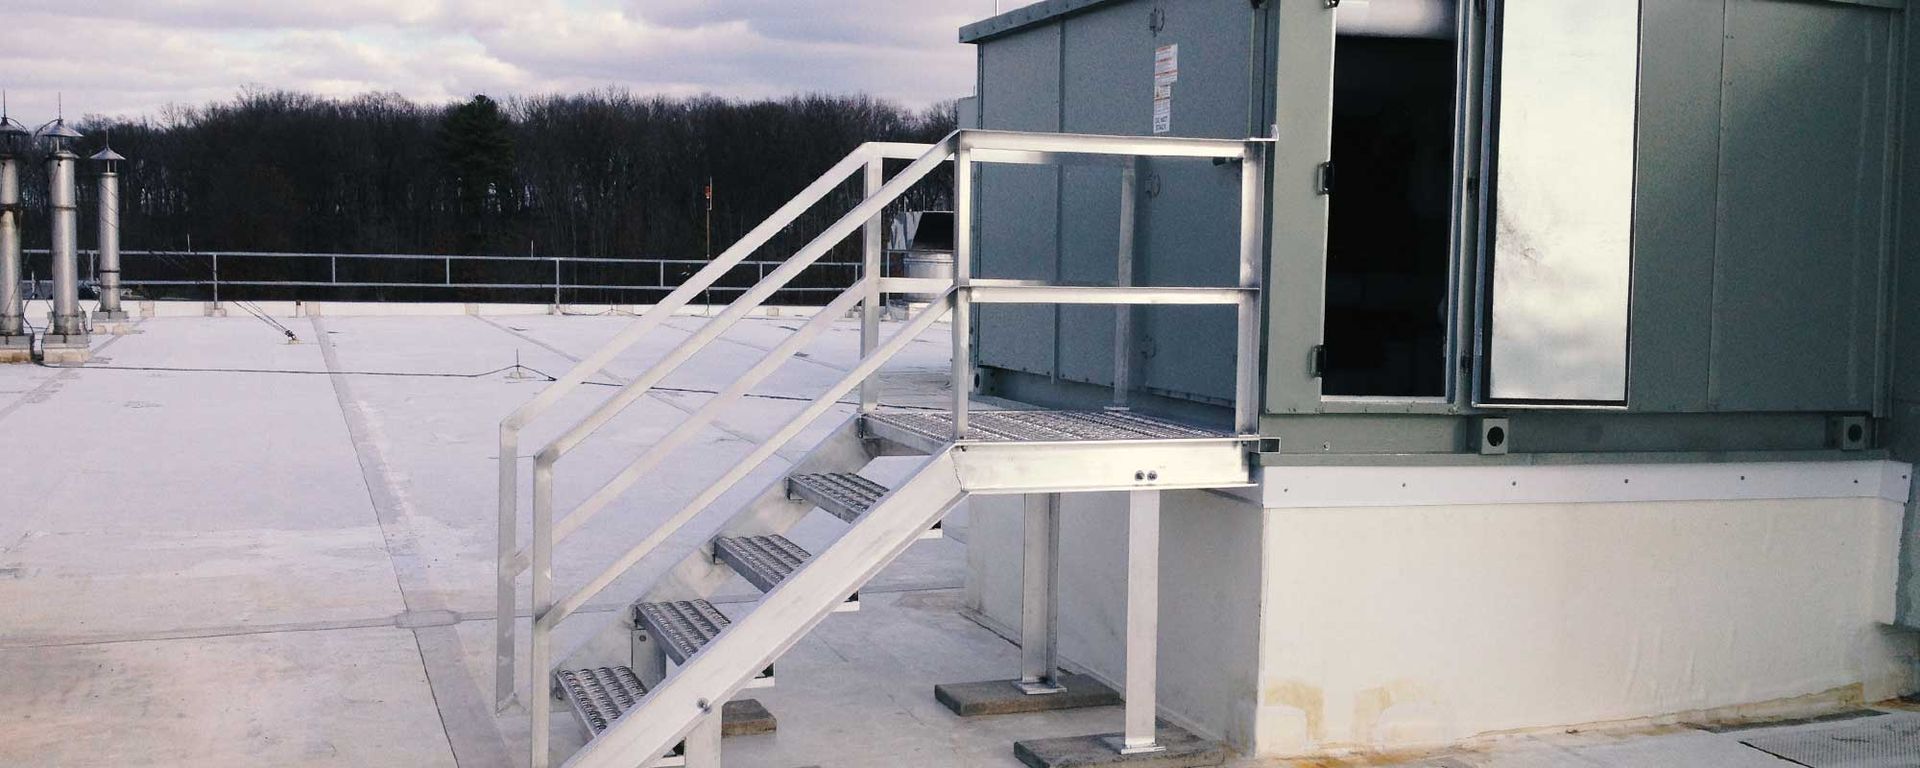 metal stairs leading to a storage container/room outdoor